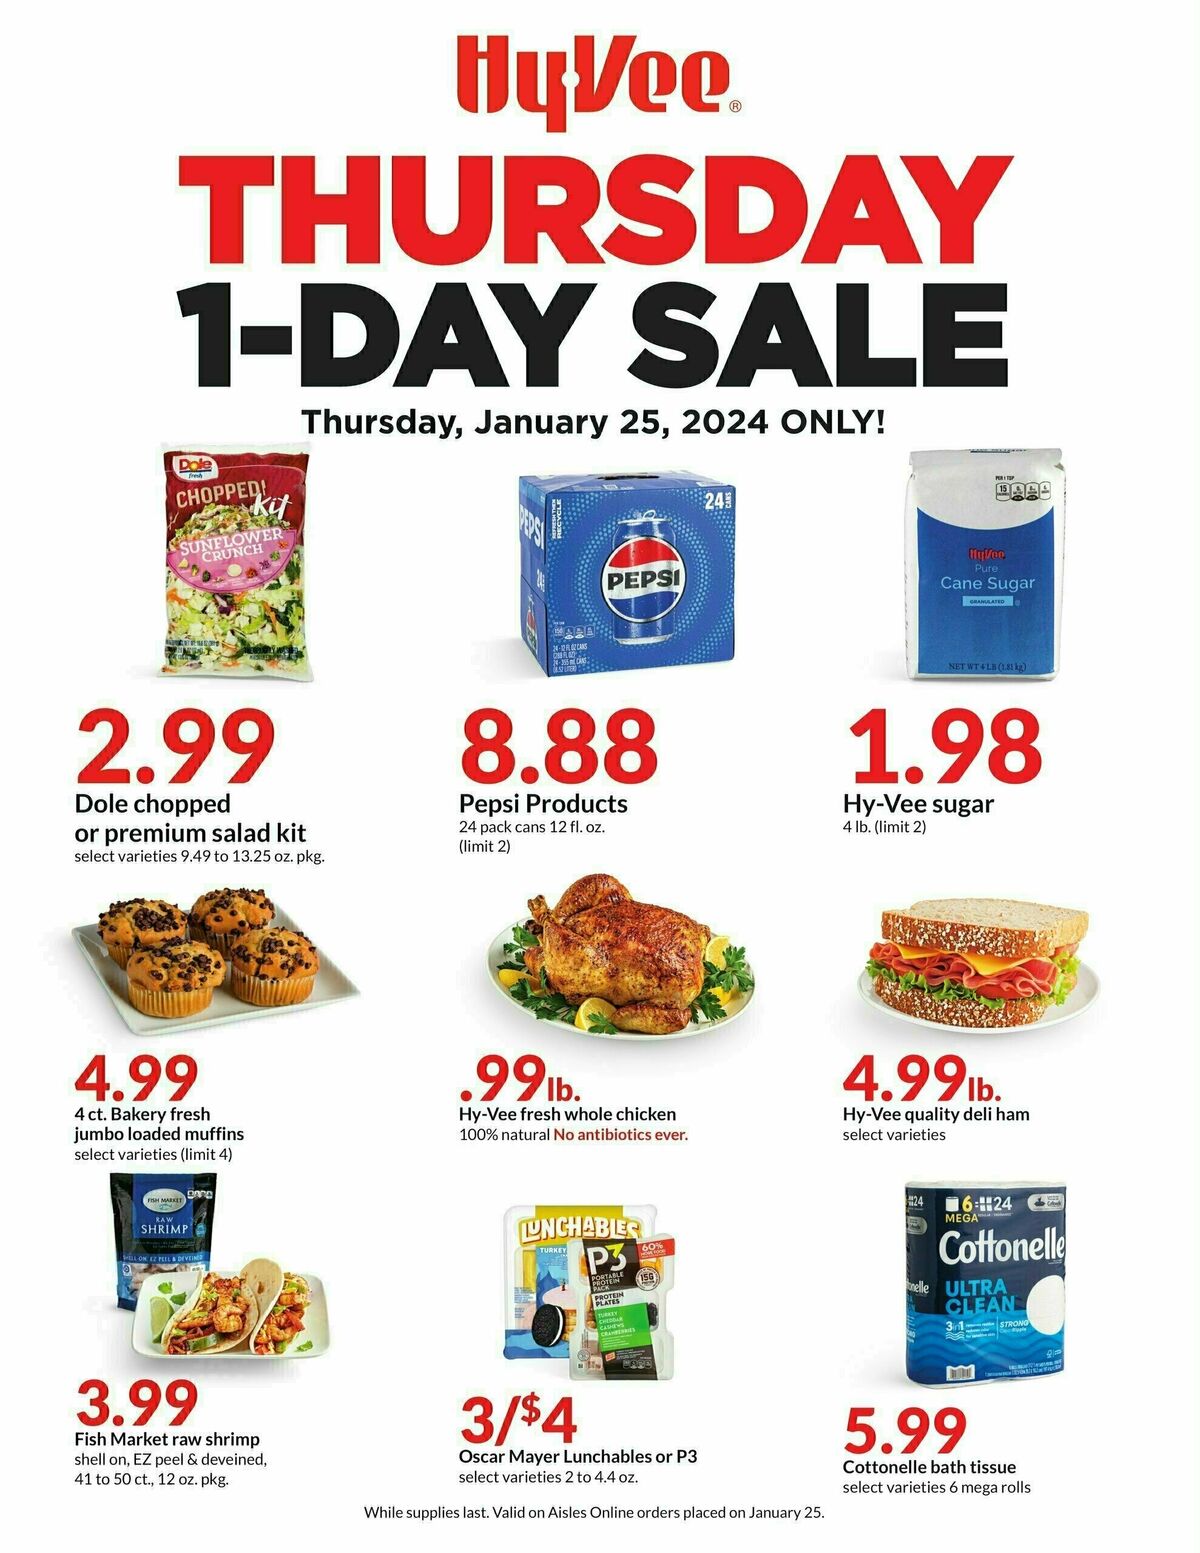 HyVee 1 Day Sale Deals & Ads from January 25